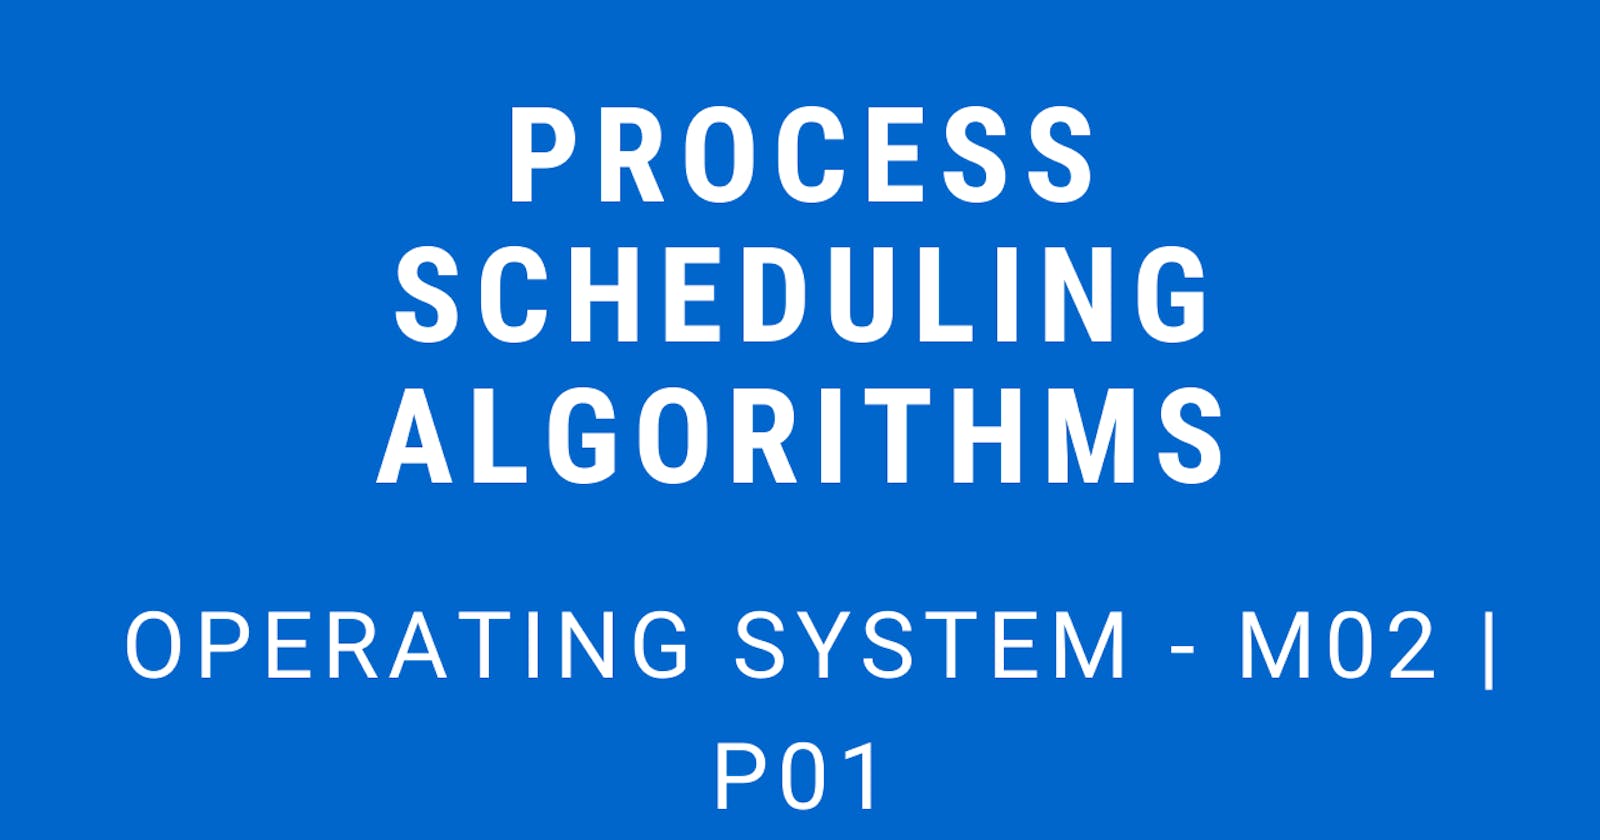 Process Scheduling Algorithms | Operating System - M02 P01